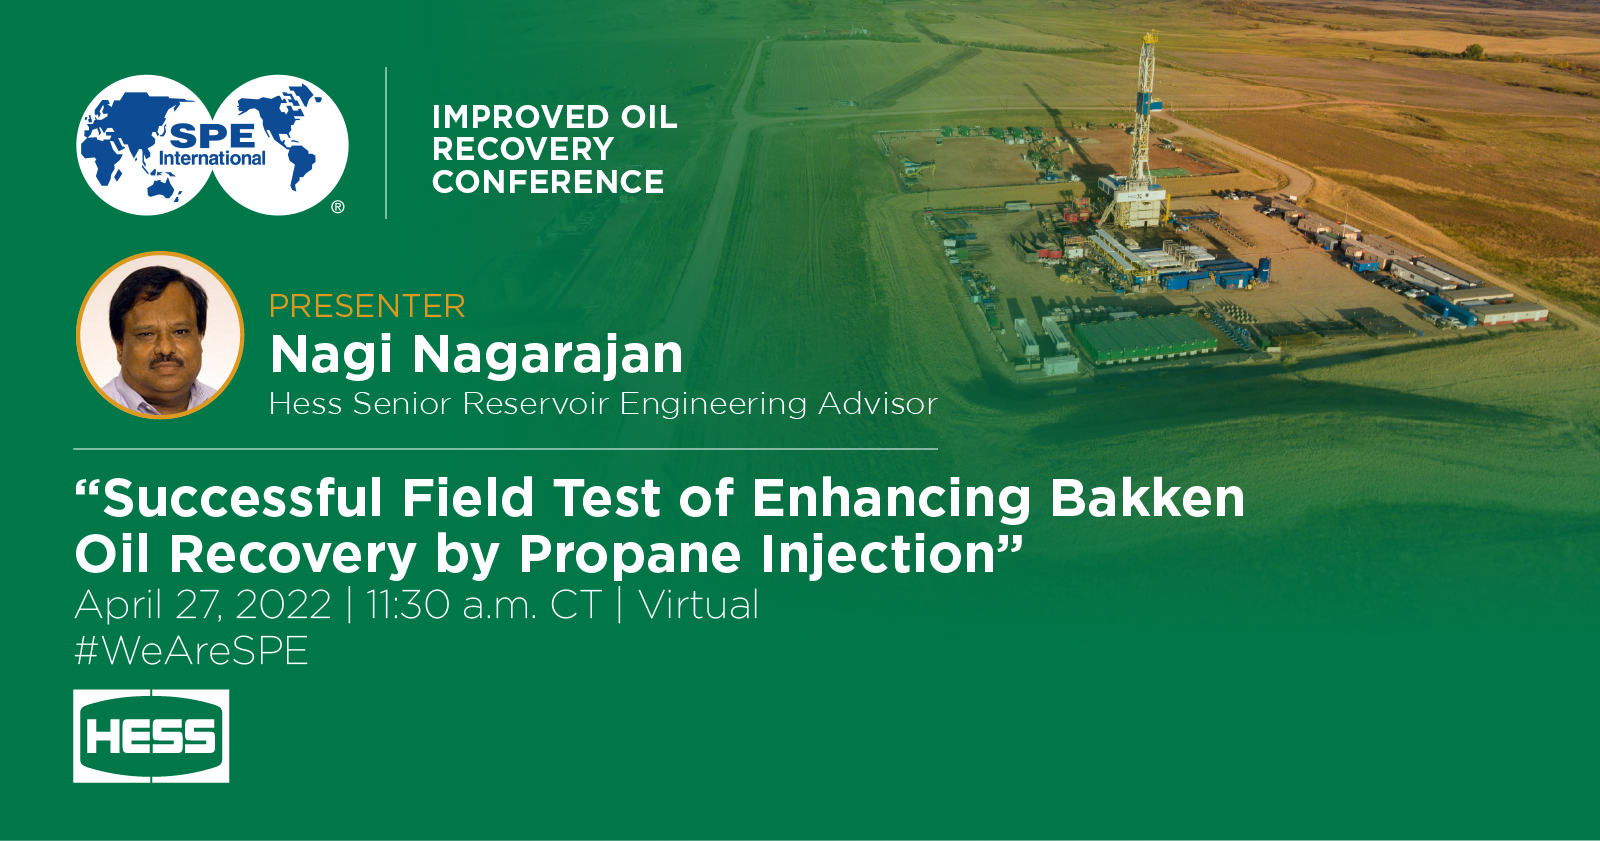 Nagi Nagarajan to Present at SPE Improved Oil Recovery Conference